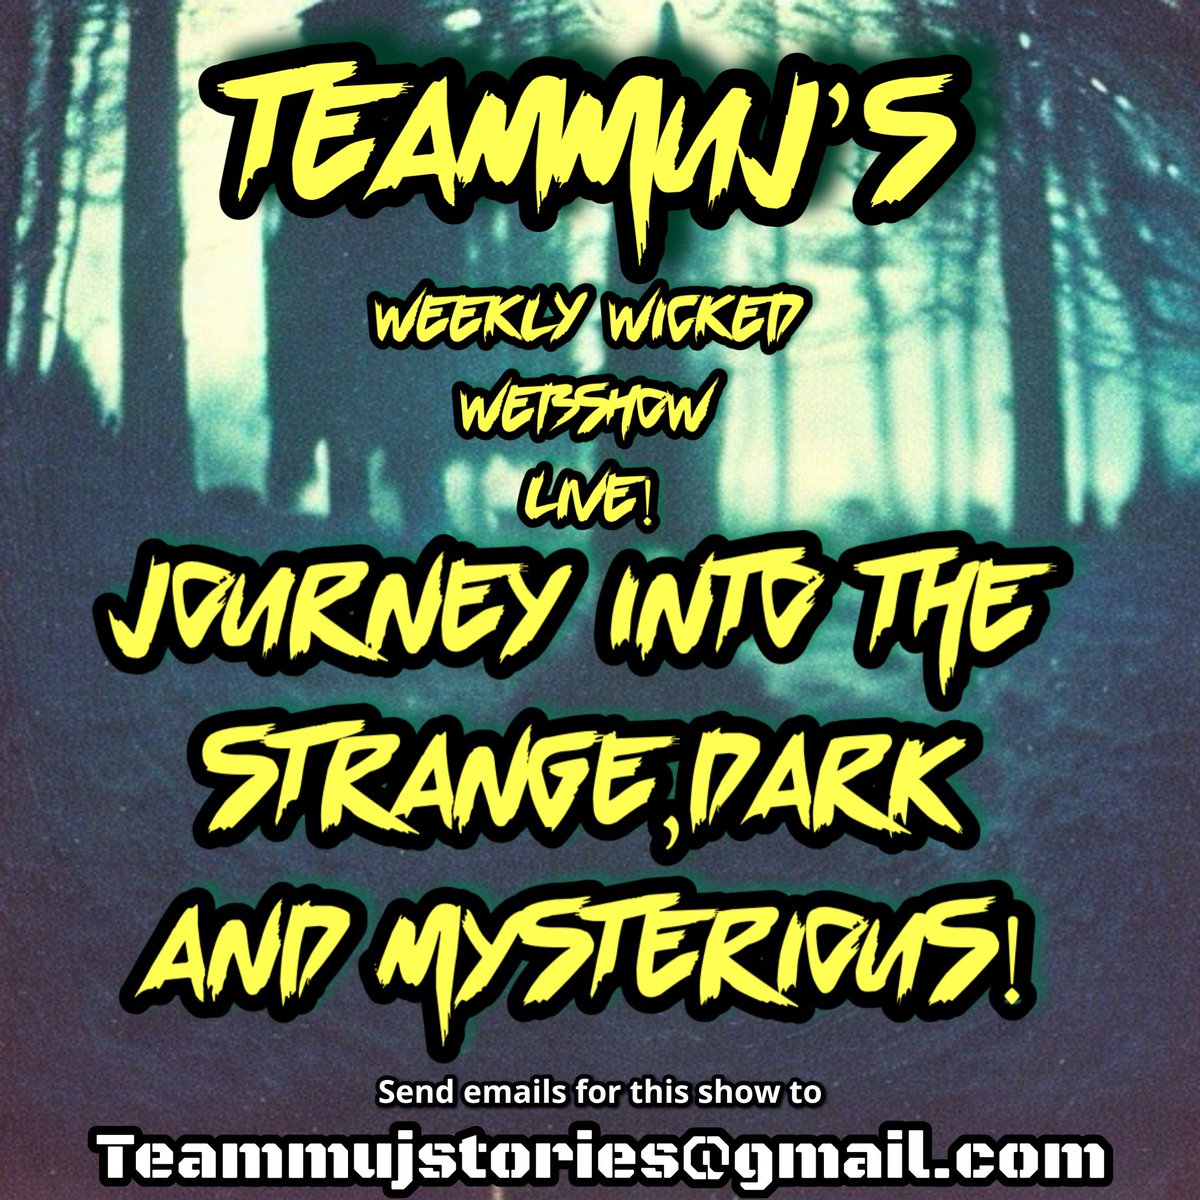 Bacc at it again this Saturday! Last episode of @TeamMUJ’s Weekly Wicked Webshow till June and we’ll be taking a journey into the Strange, Dark and Mysterious! More info dropping later this week! If you’d like to share a written, video or audio story send them to the new email!